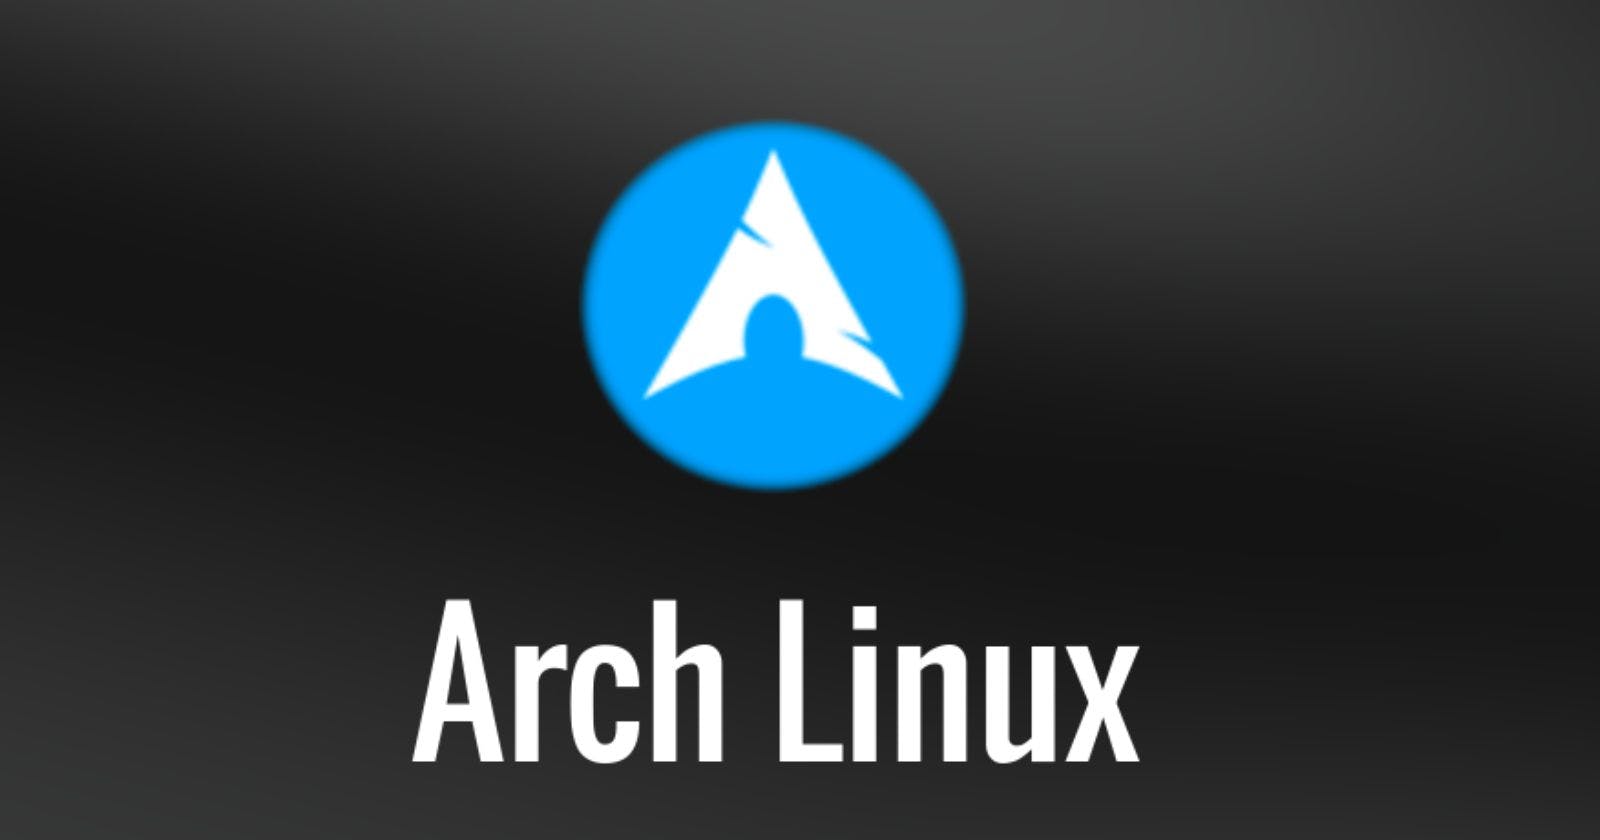 Installing Java on Arch Linux